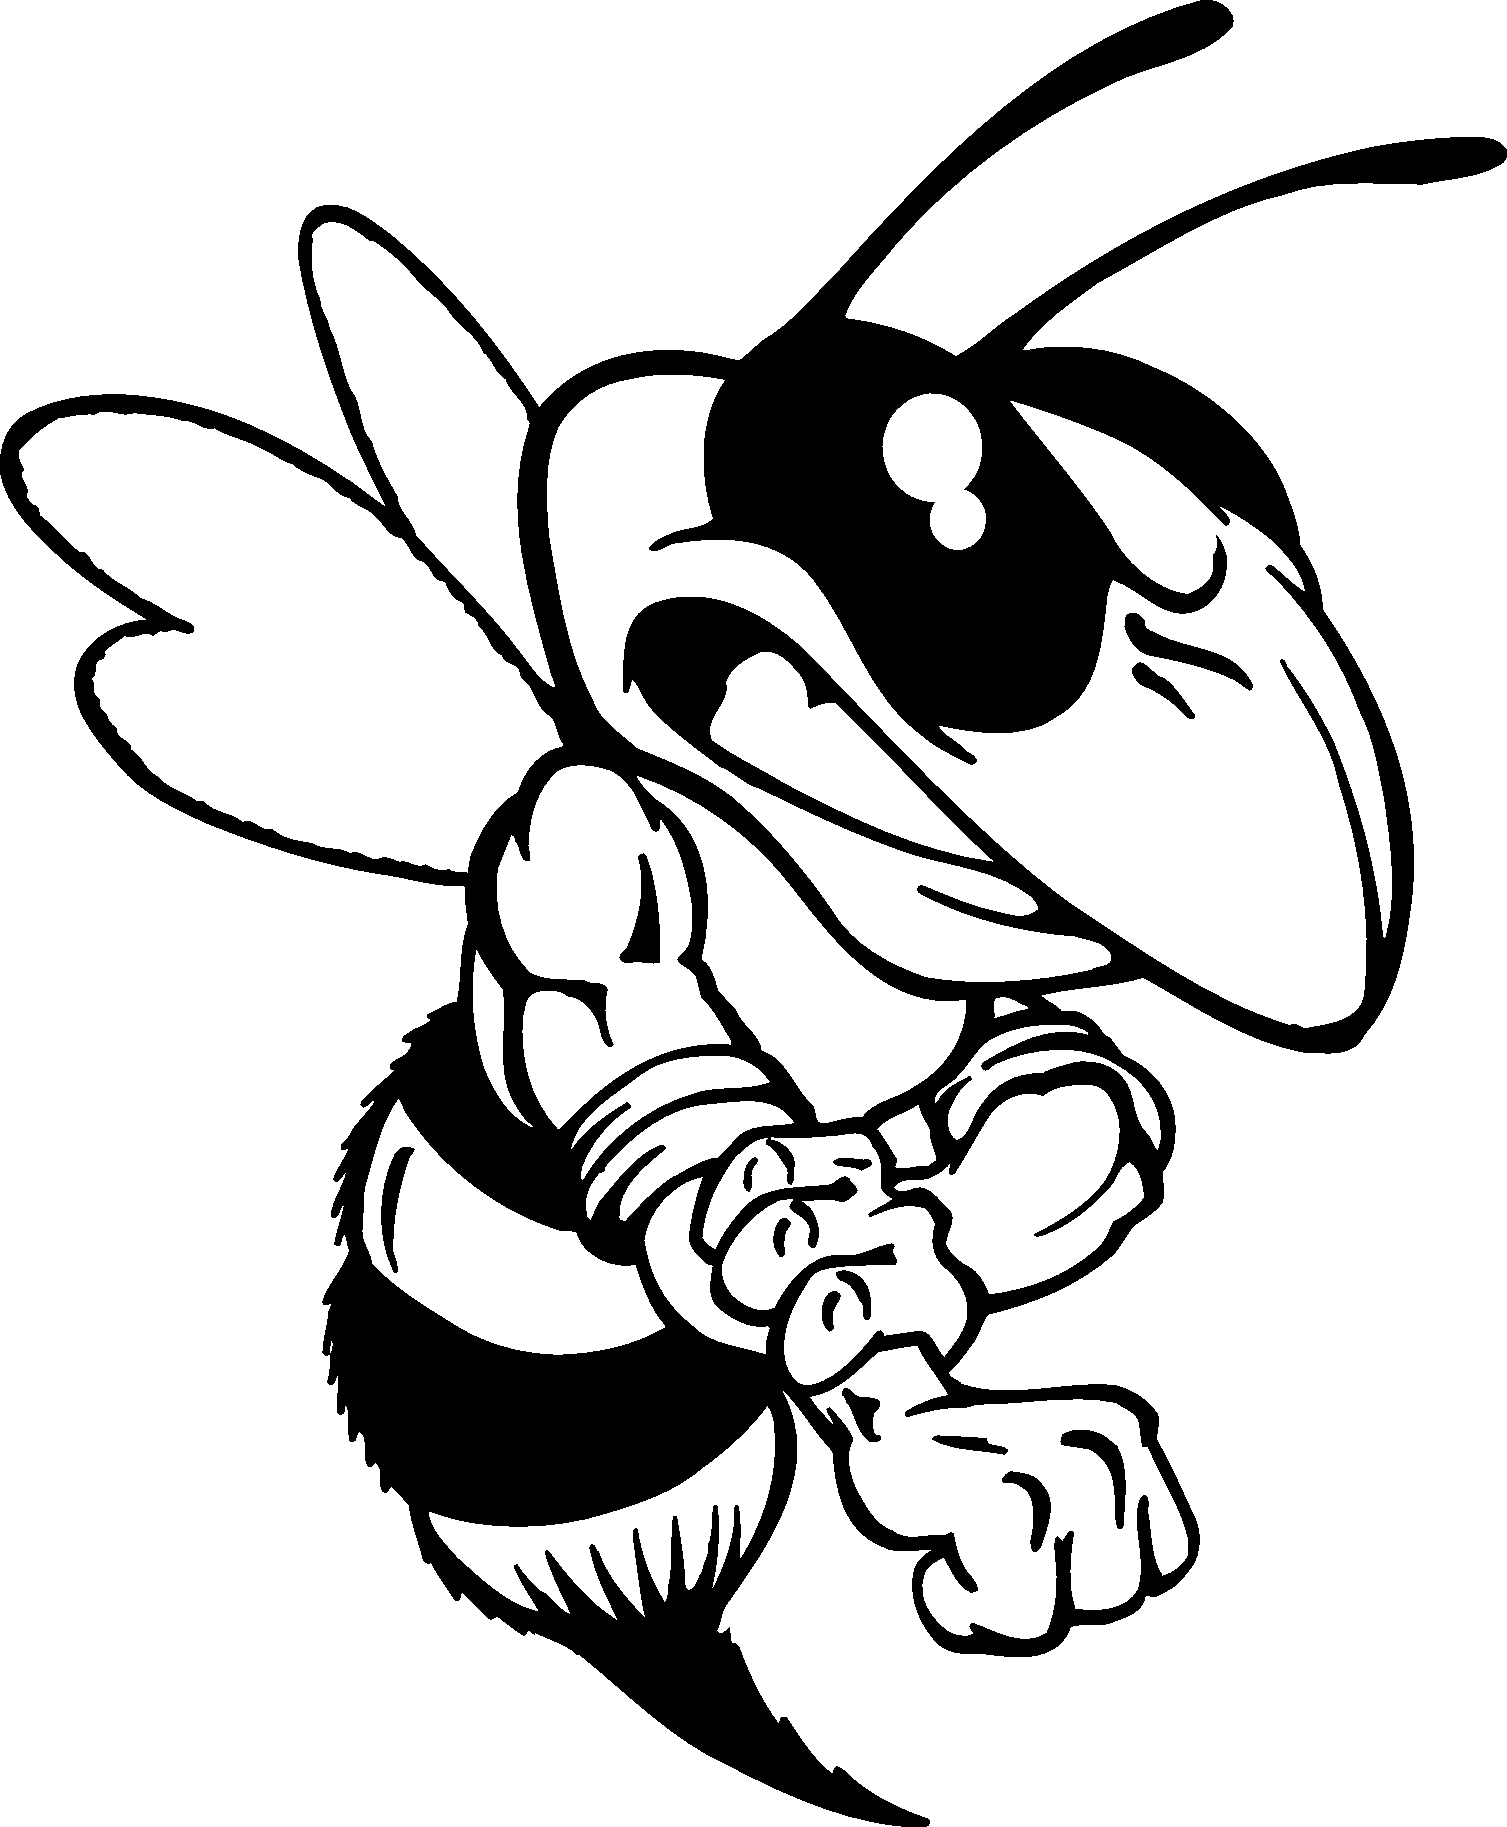 clip art bee line drawing - photo #30